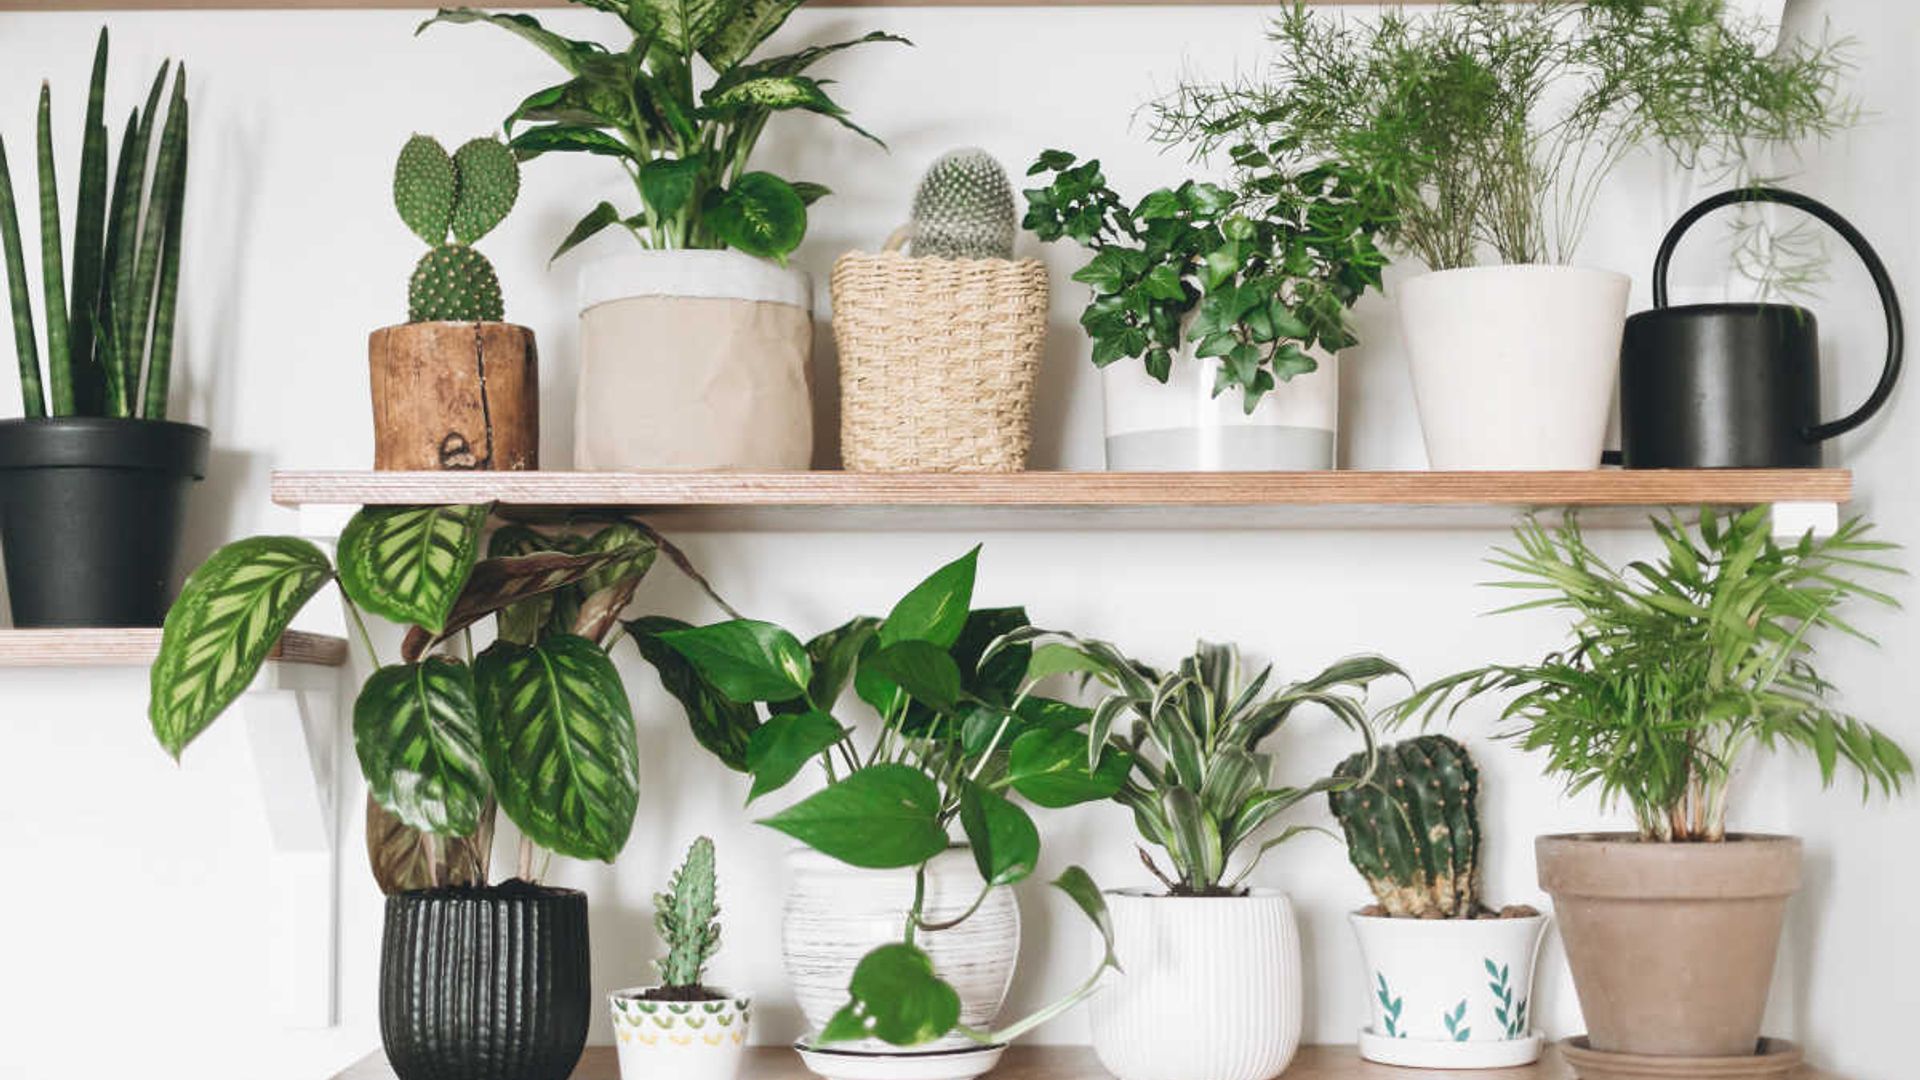  Most Popular House Plants  From The Snake Plant To The Prickly Cactus Hello - Top 10 Living Room Plants